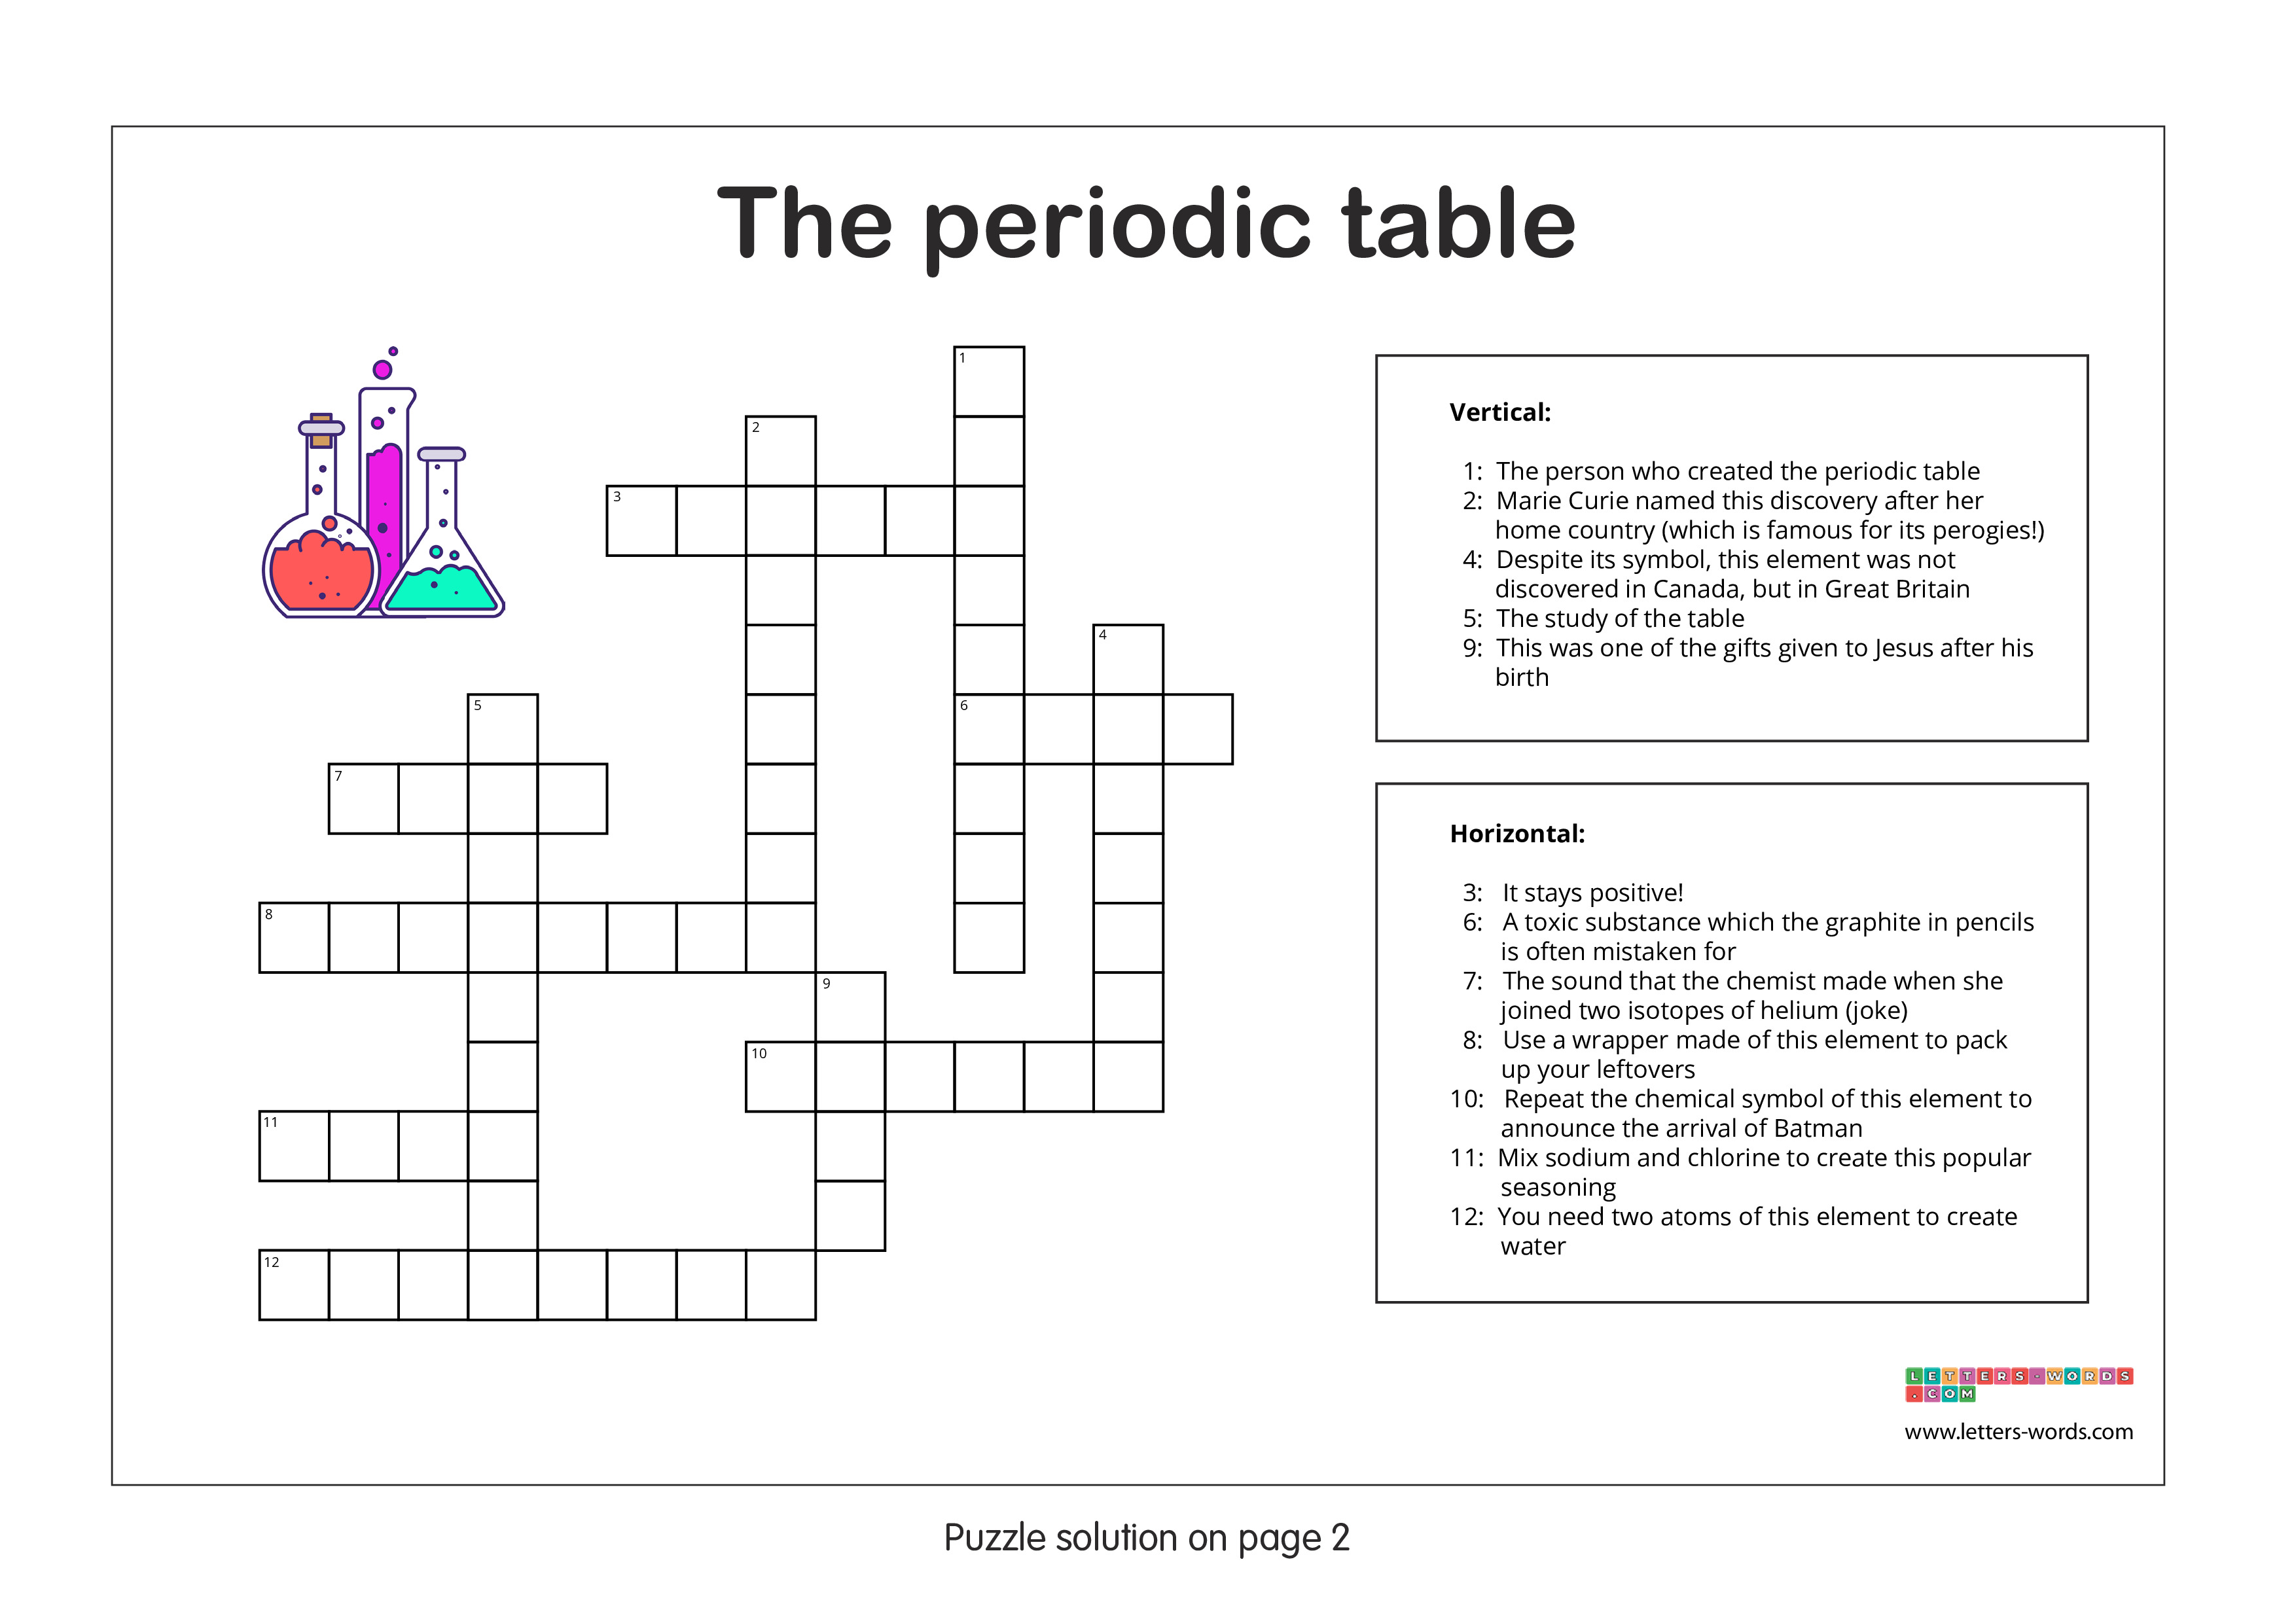 Crossword puzzles for children aged 12+ - The periodic table